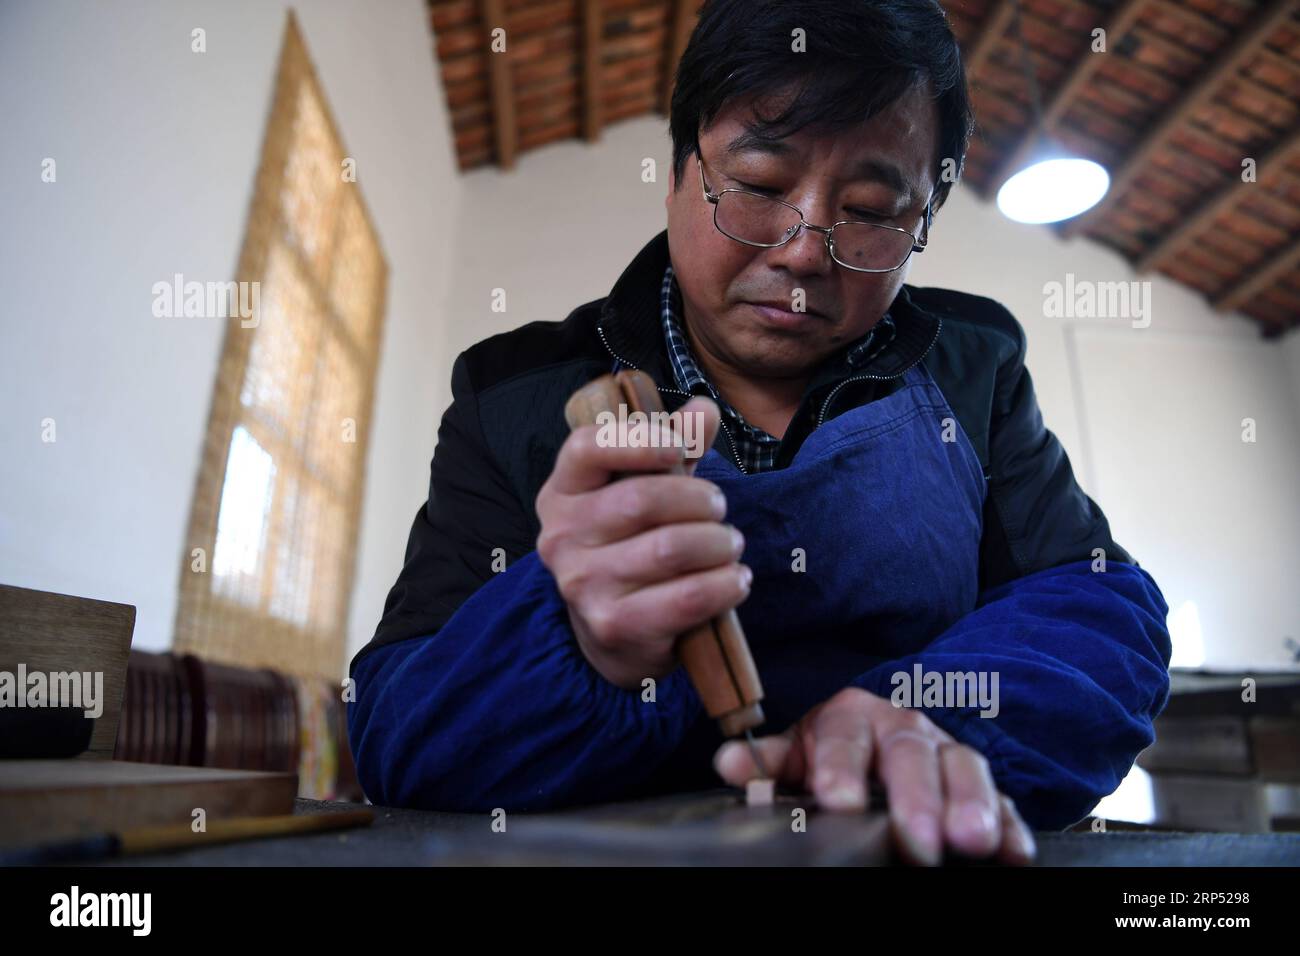 (181124) -- JINGXIAN, Nov. 24, 2018 -- Lei Shitai works in Chanshan Village of Qinxi Town, Jingxian County, in east China s Anhui Province, Nov. 23, 2018. Lei, 52, born in neighboring Jiangxi Province, started his career as a typography printer when he finished his apprenticeship with his uncle who he followed since he was 17. The traditional printing method witnessed an increasingly hard time in the recent years as a livelihood. It was in 2017 when he decided to move to Chanshan at the invitation of Kai Yuanhong, a local cabinet maker, to cooperate in a broader way. Lei is now working with th Stock Photo